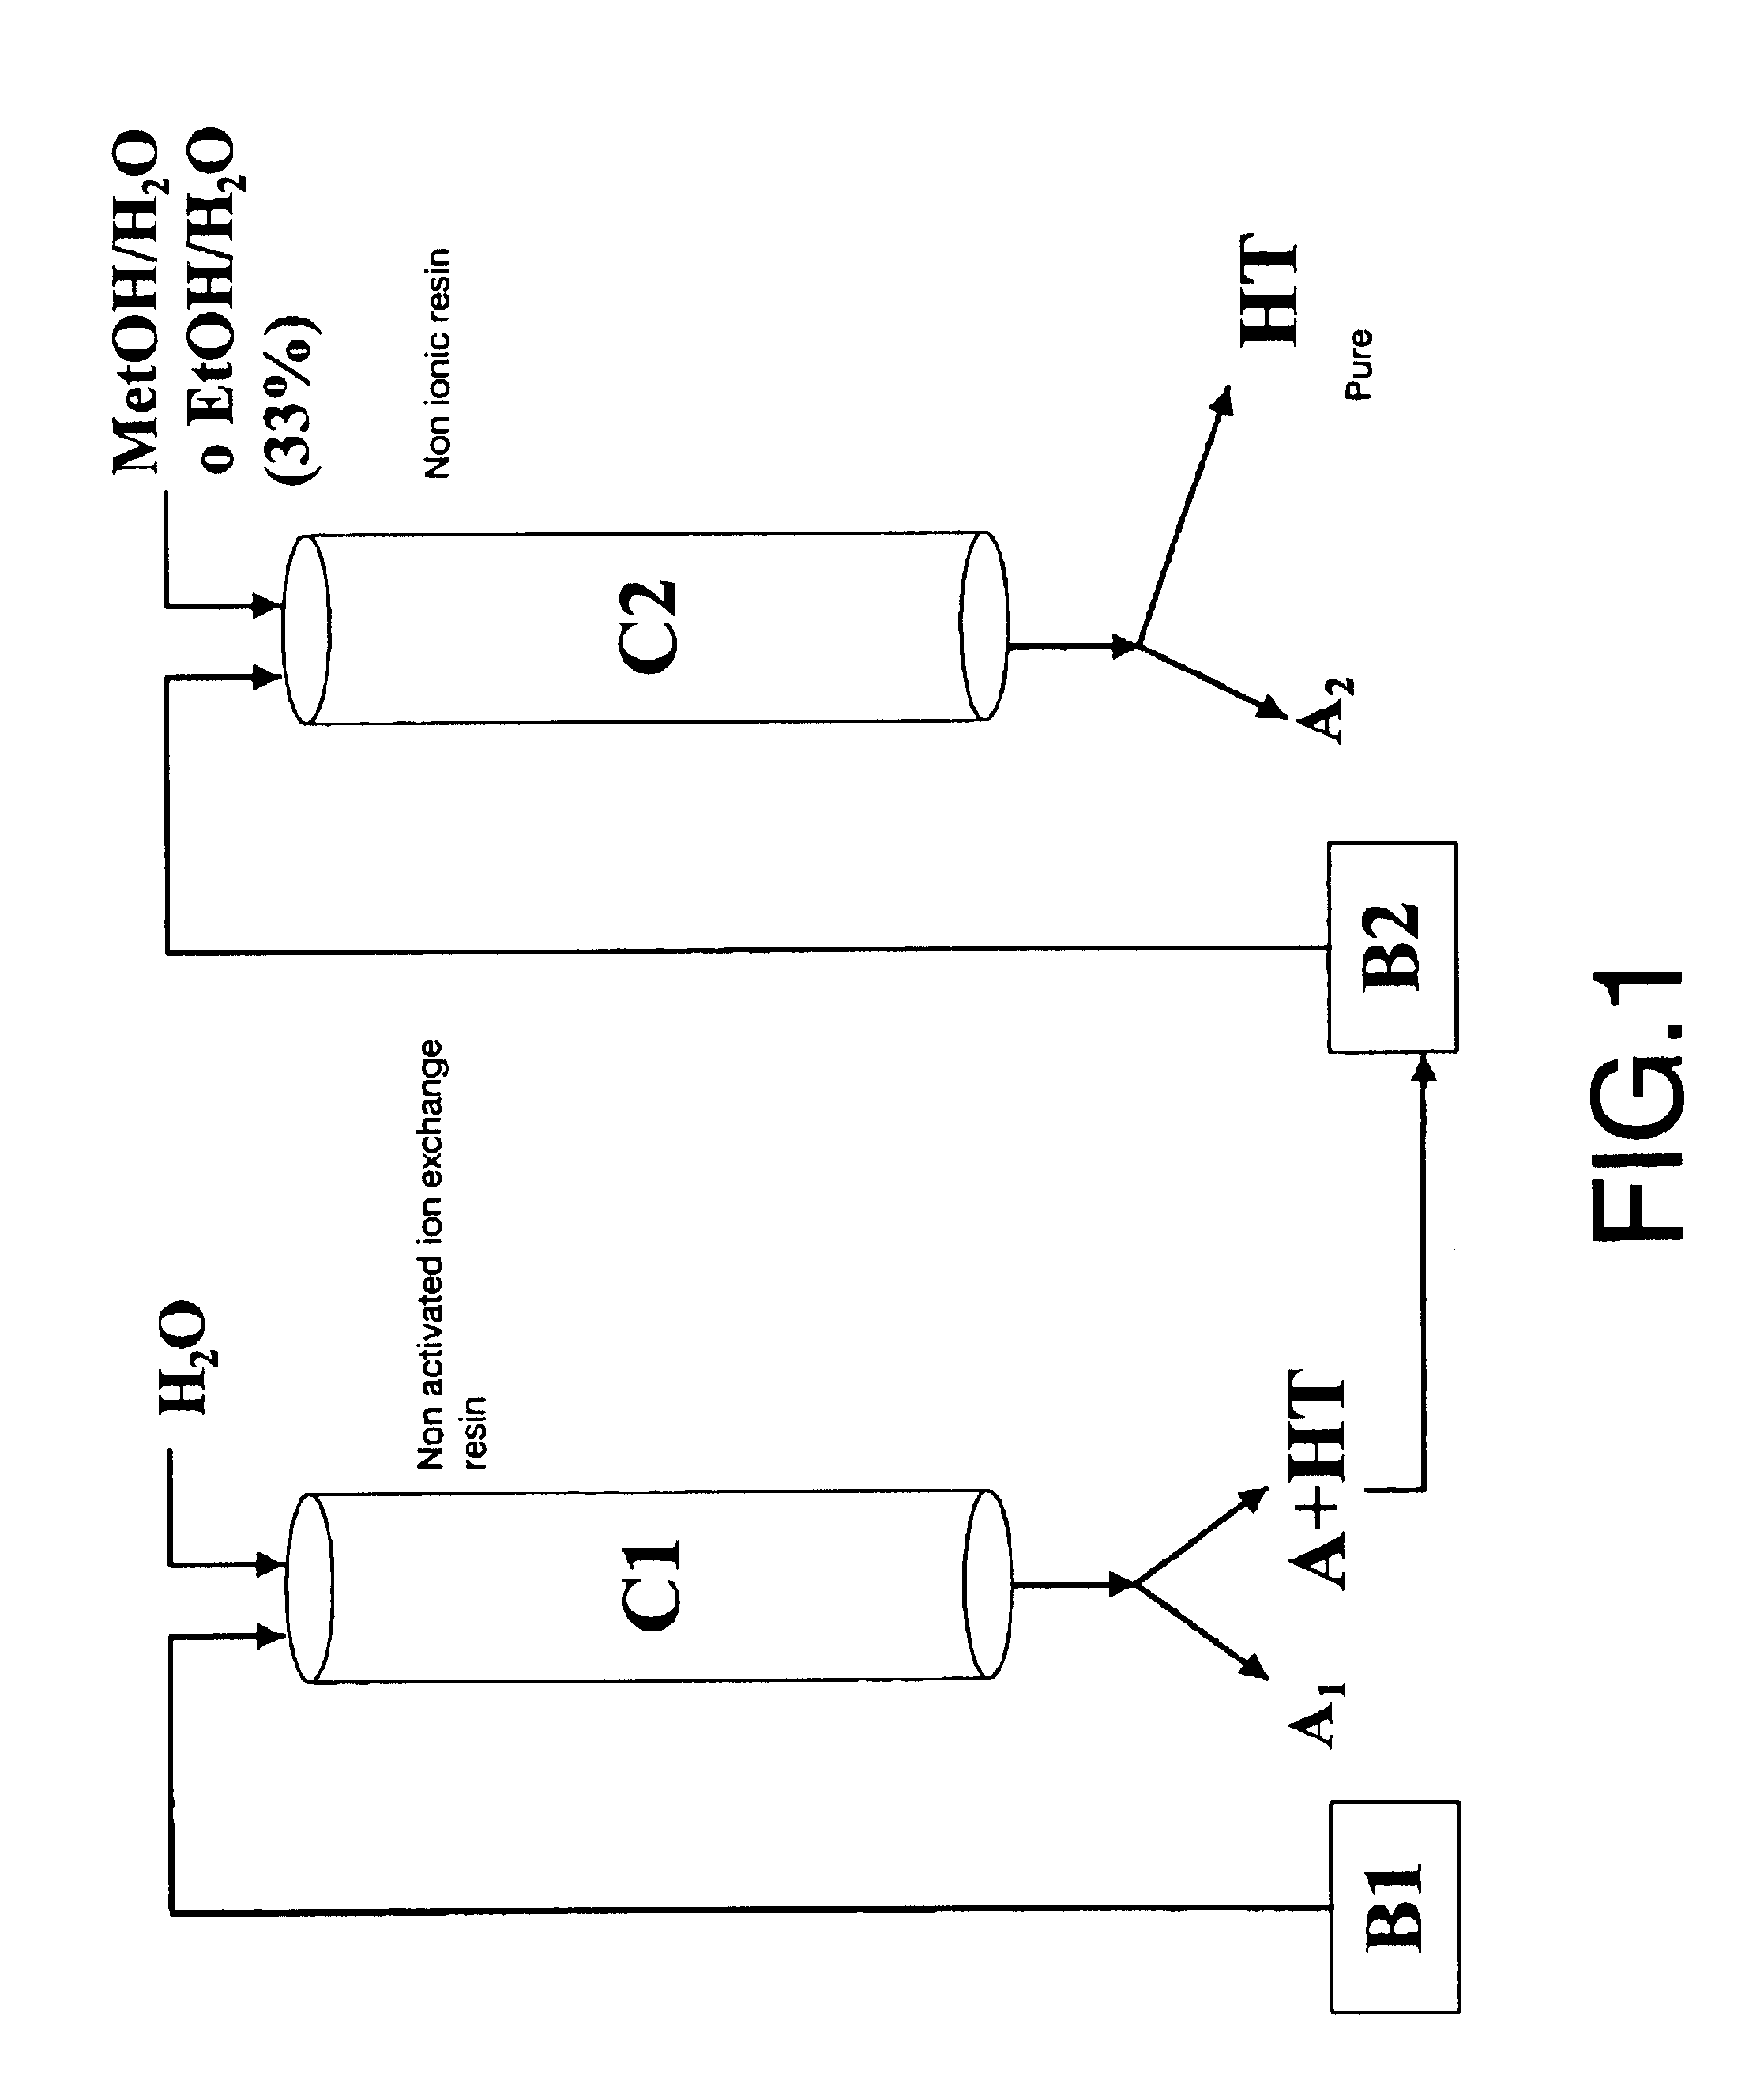 Method for obtaining purified hydroxytyrosol from products and by-products derived from the olive tree